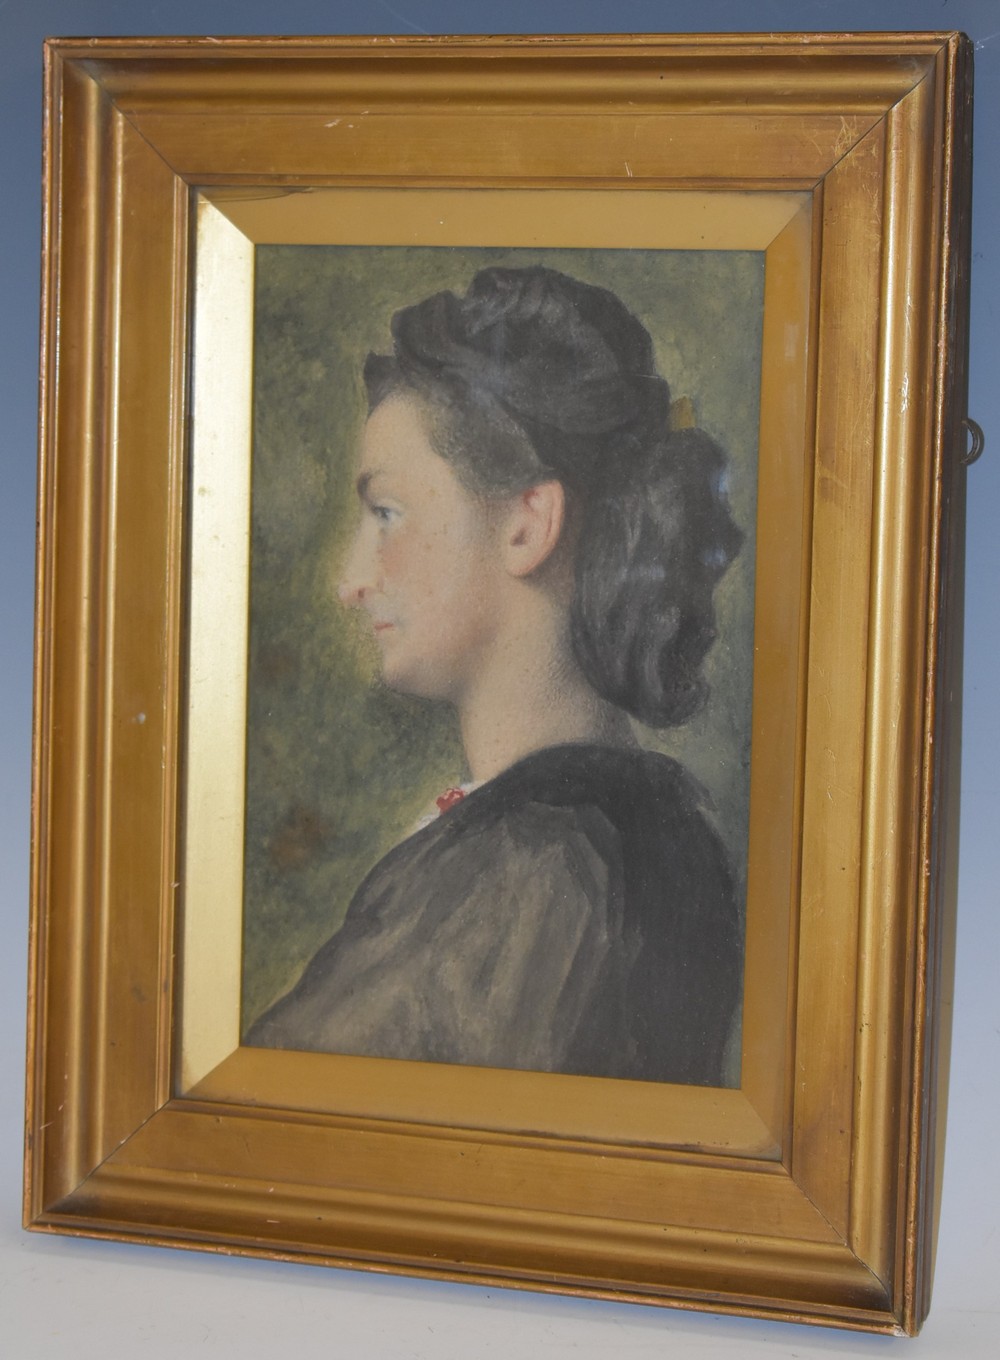 Early 20th century English School, A Profile Portrait of a Young Lady, watercolour, 21.